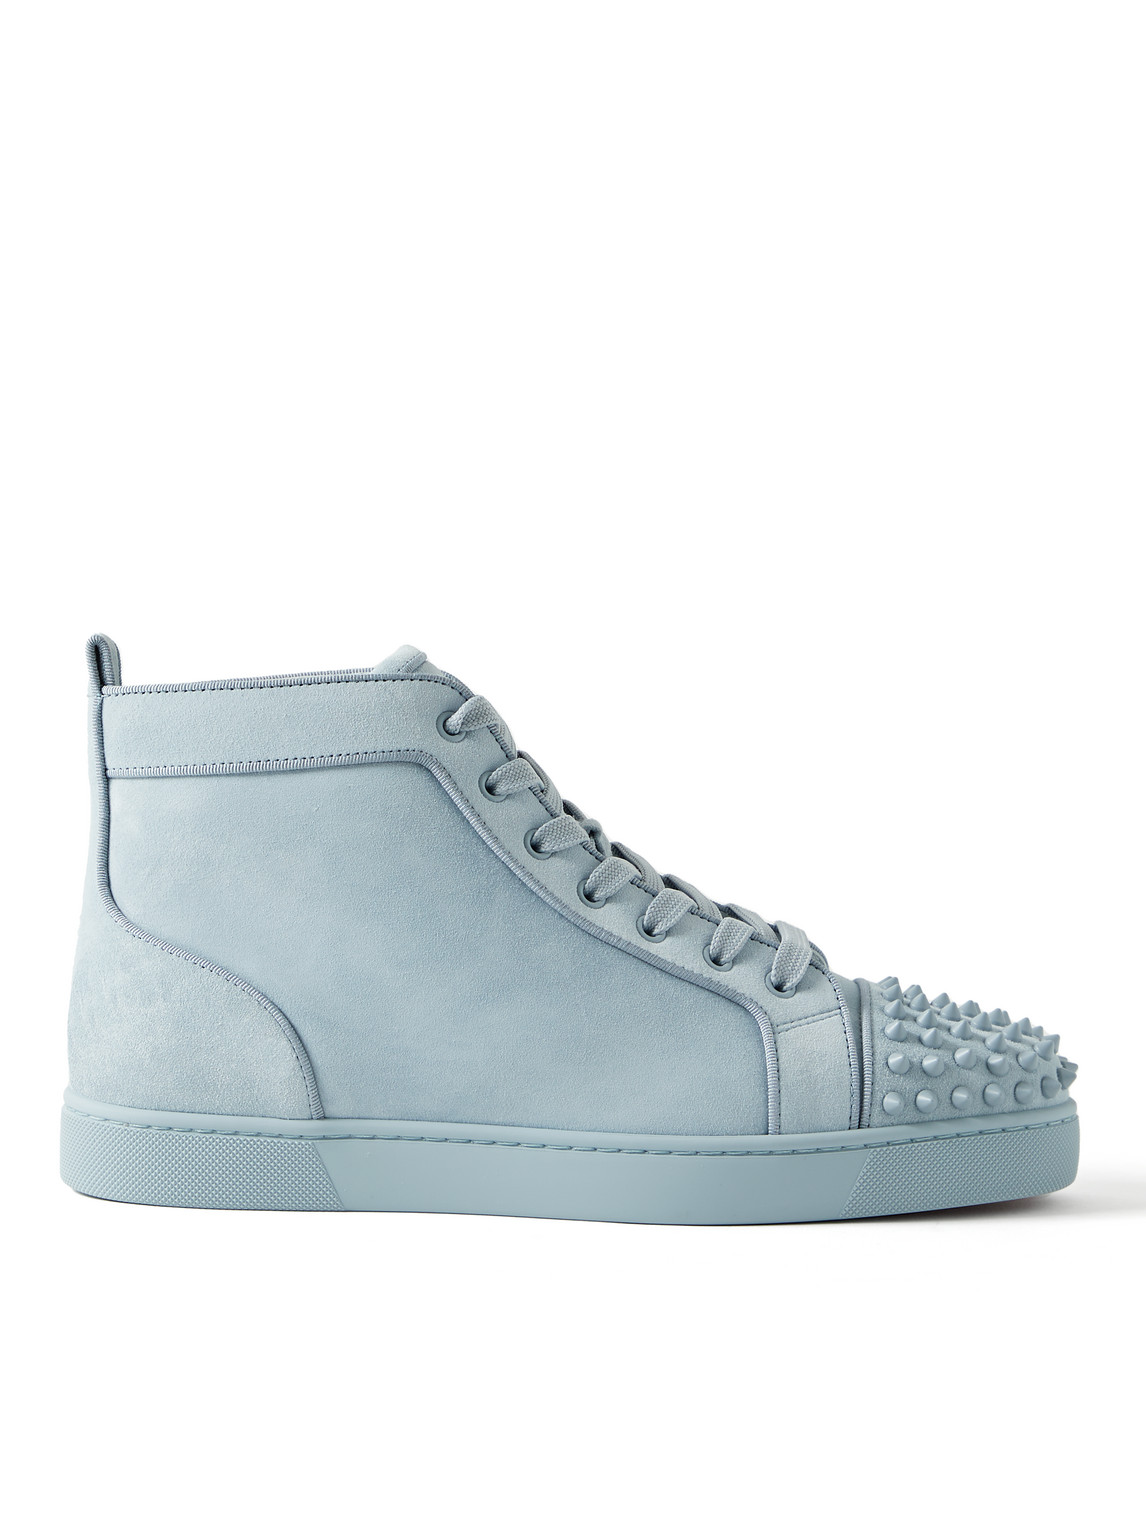 Christian Louboutin Lou Spikes Suede Trainers In Blue